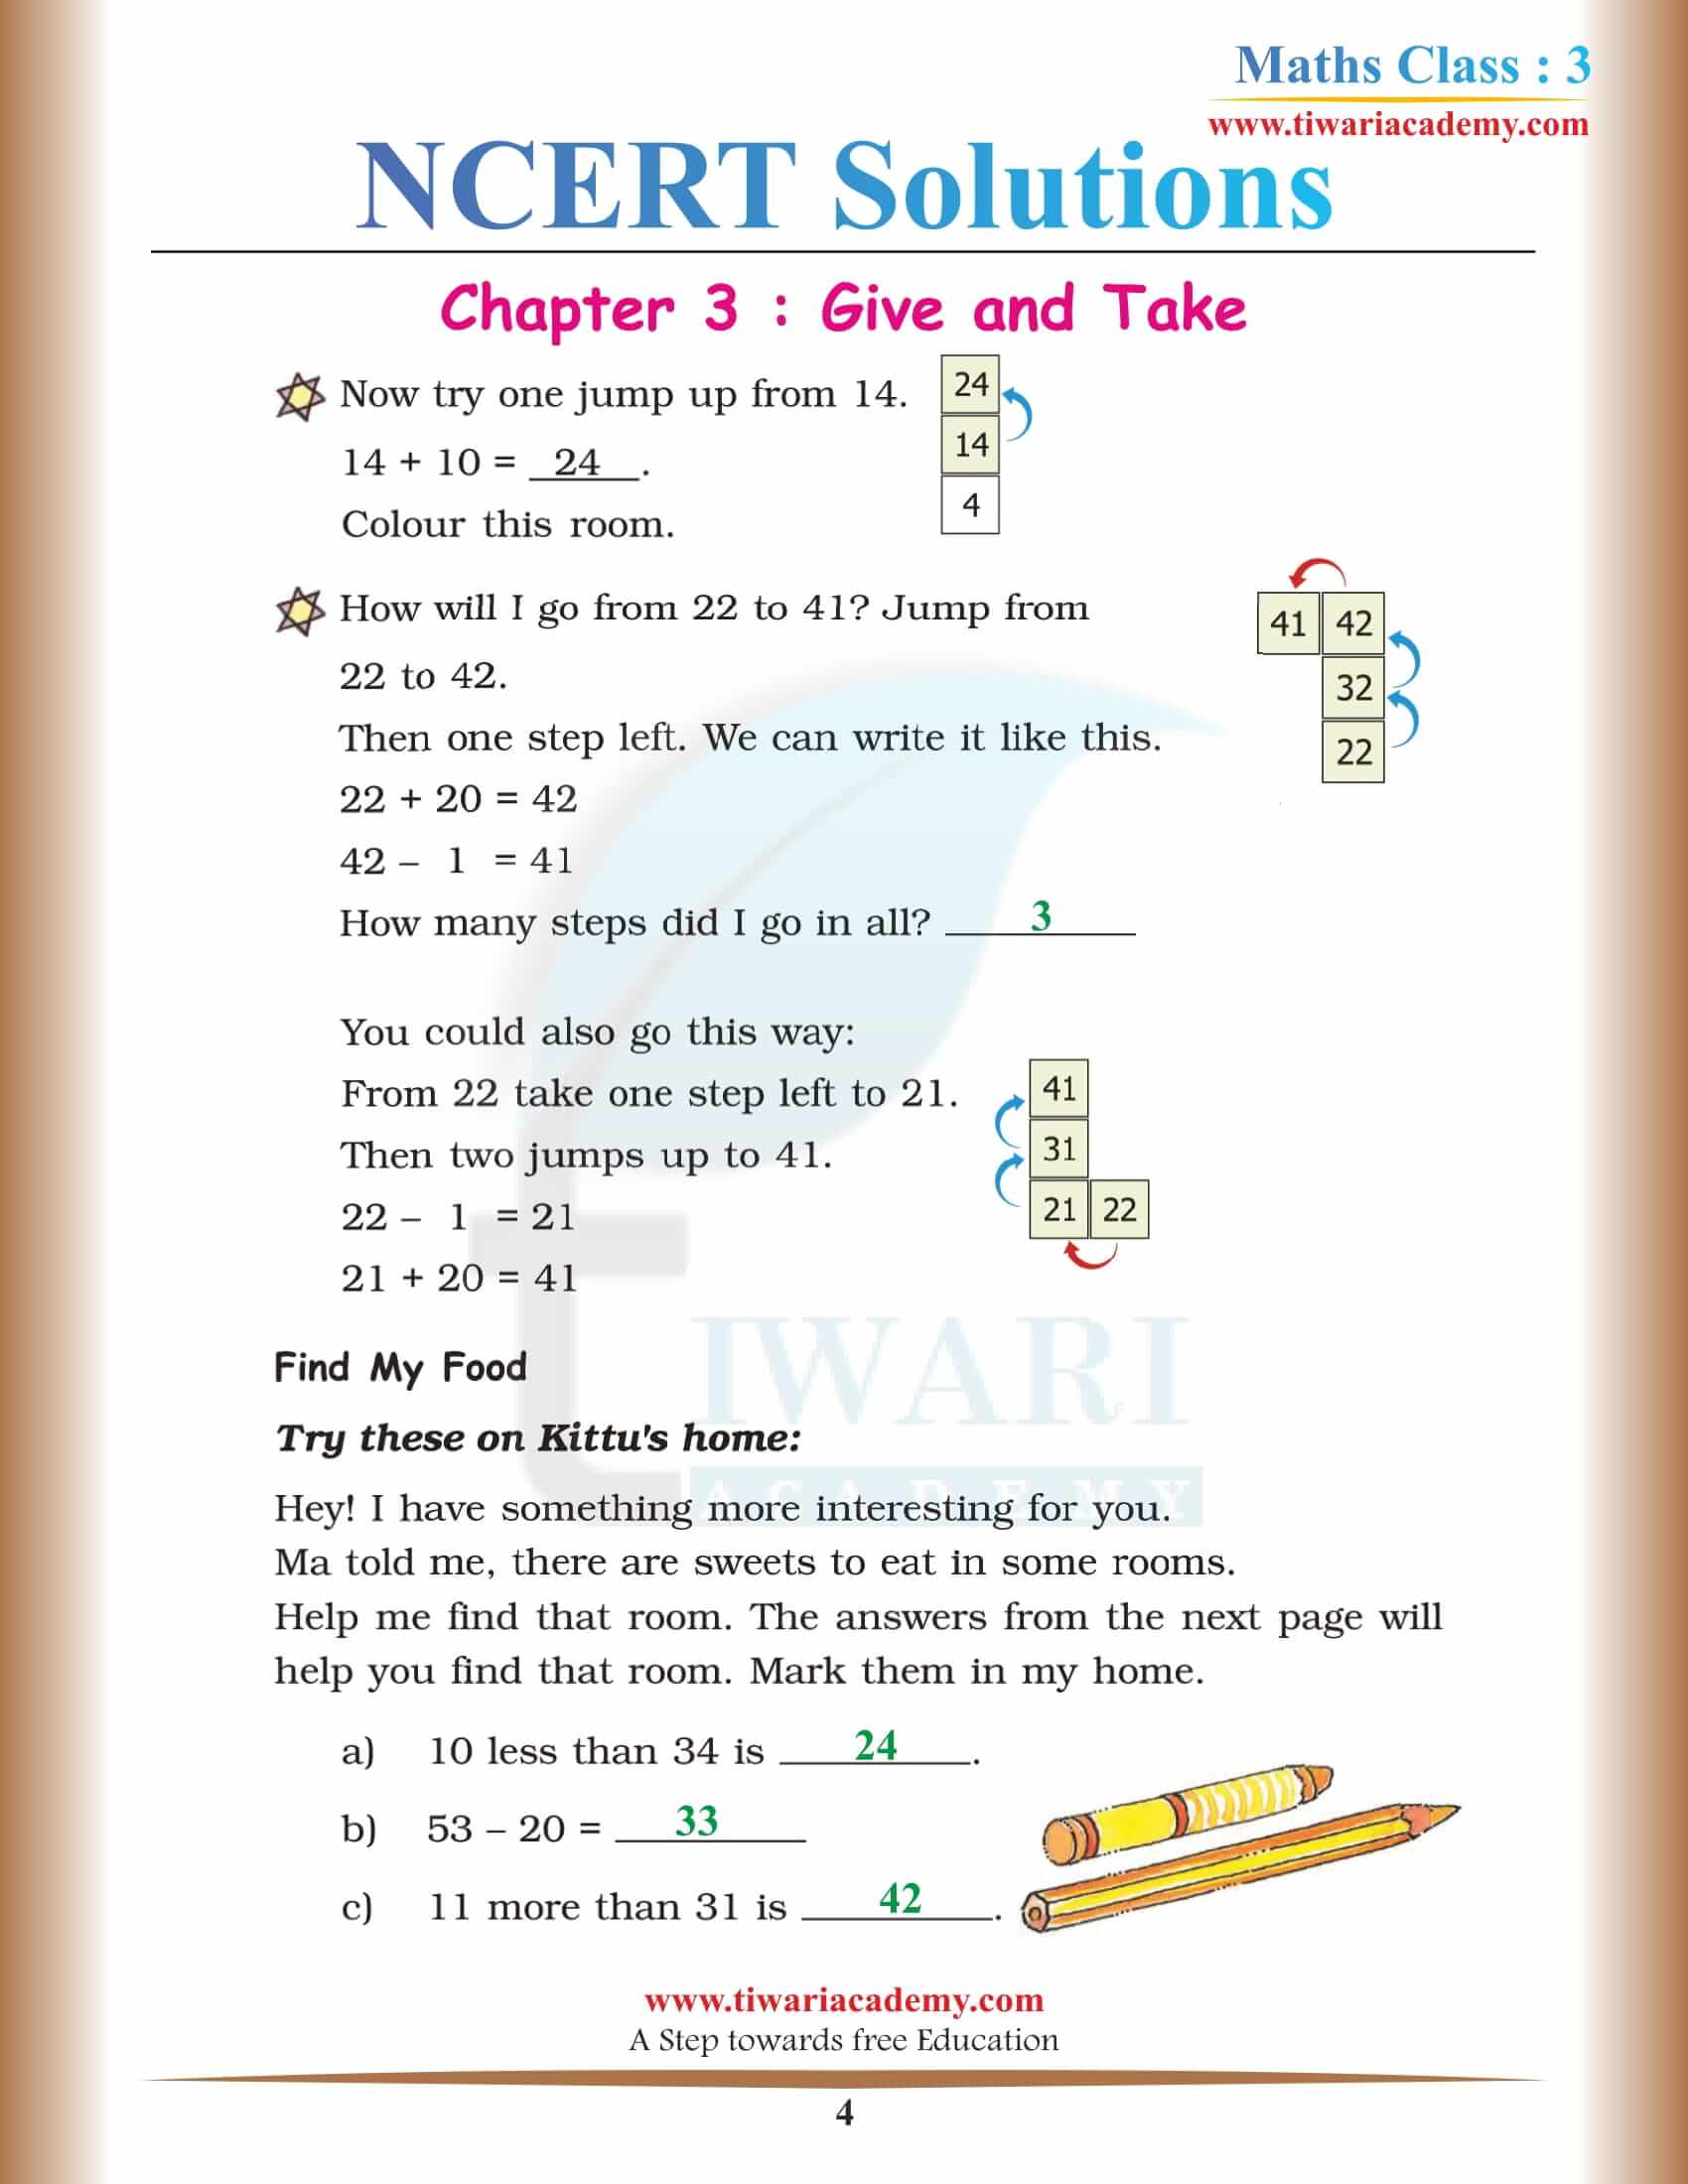 NCERT Solutions for Class 3 Maths Chapter 3 answers